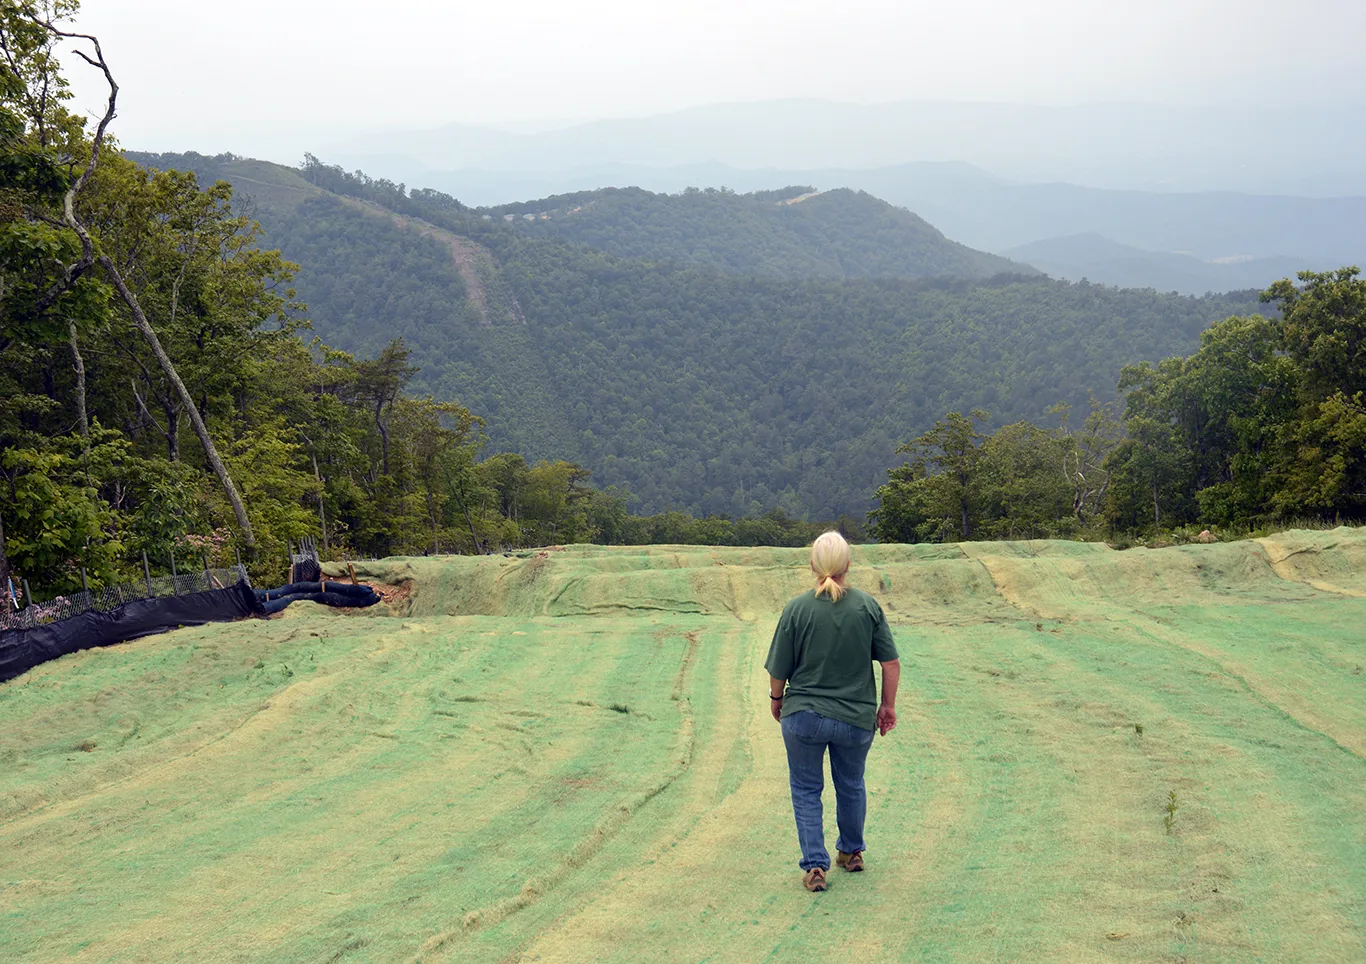 Red Terry traces the path of the pipeline on Poor Mountain and beyond in Appalachia, a stretch that includes the water supply for the nearby city of Roanoke. Credit: Elizabeth McGowan